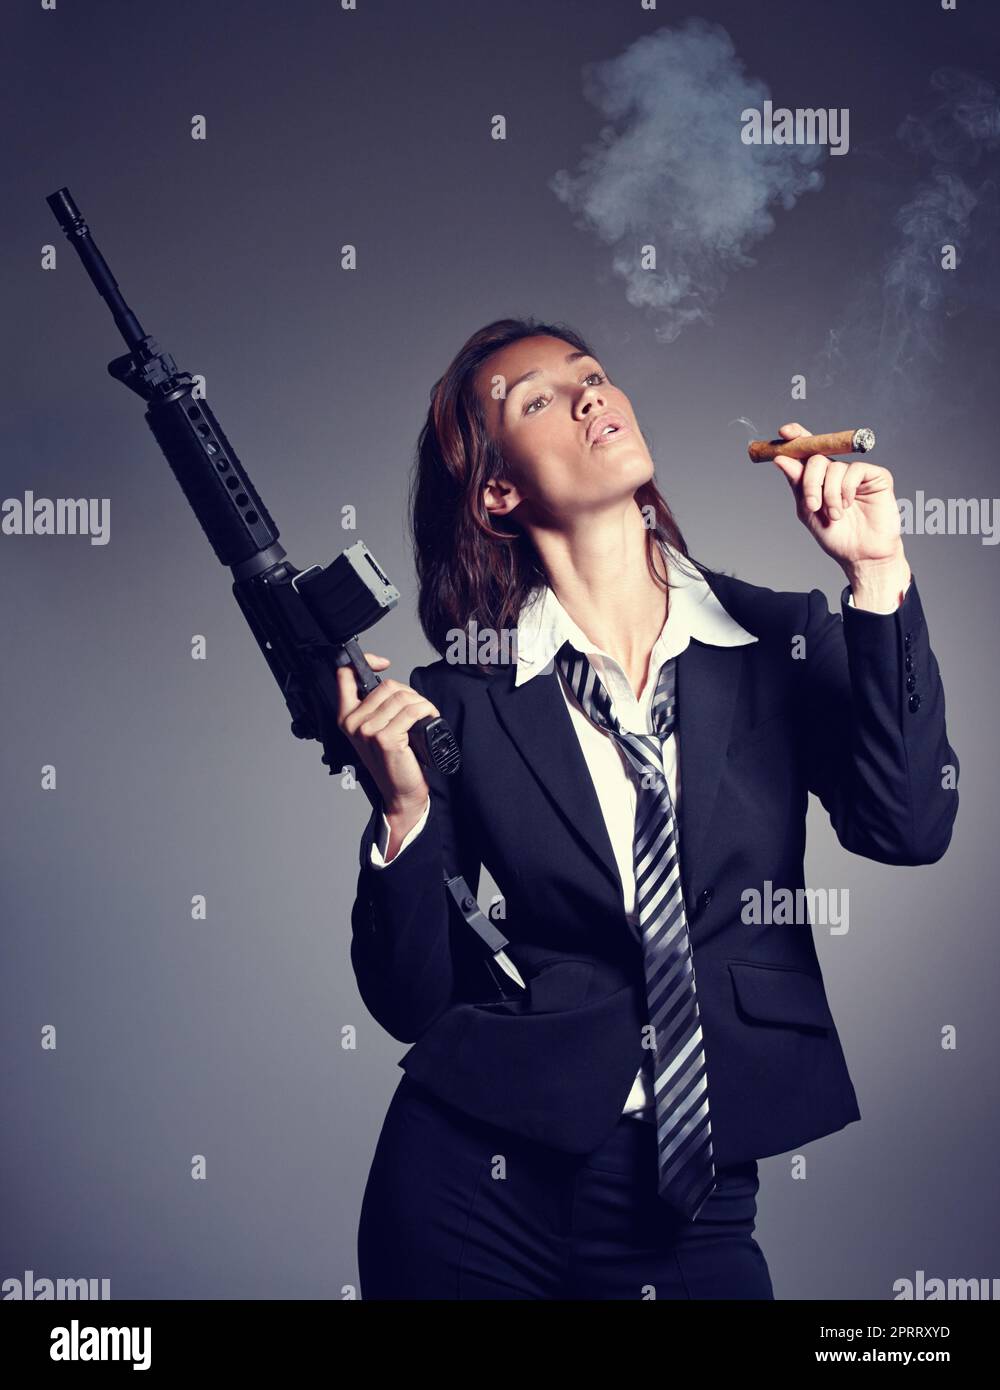 On a job well done. A young businesswoman wearing a suit and tie holding a rifle while smoking a cigar. Stock Photo